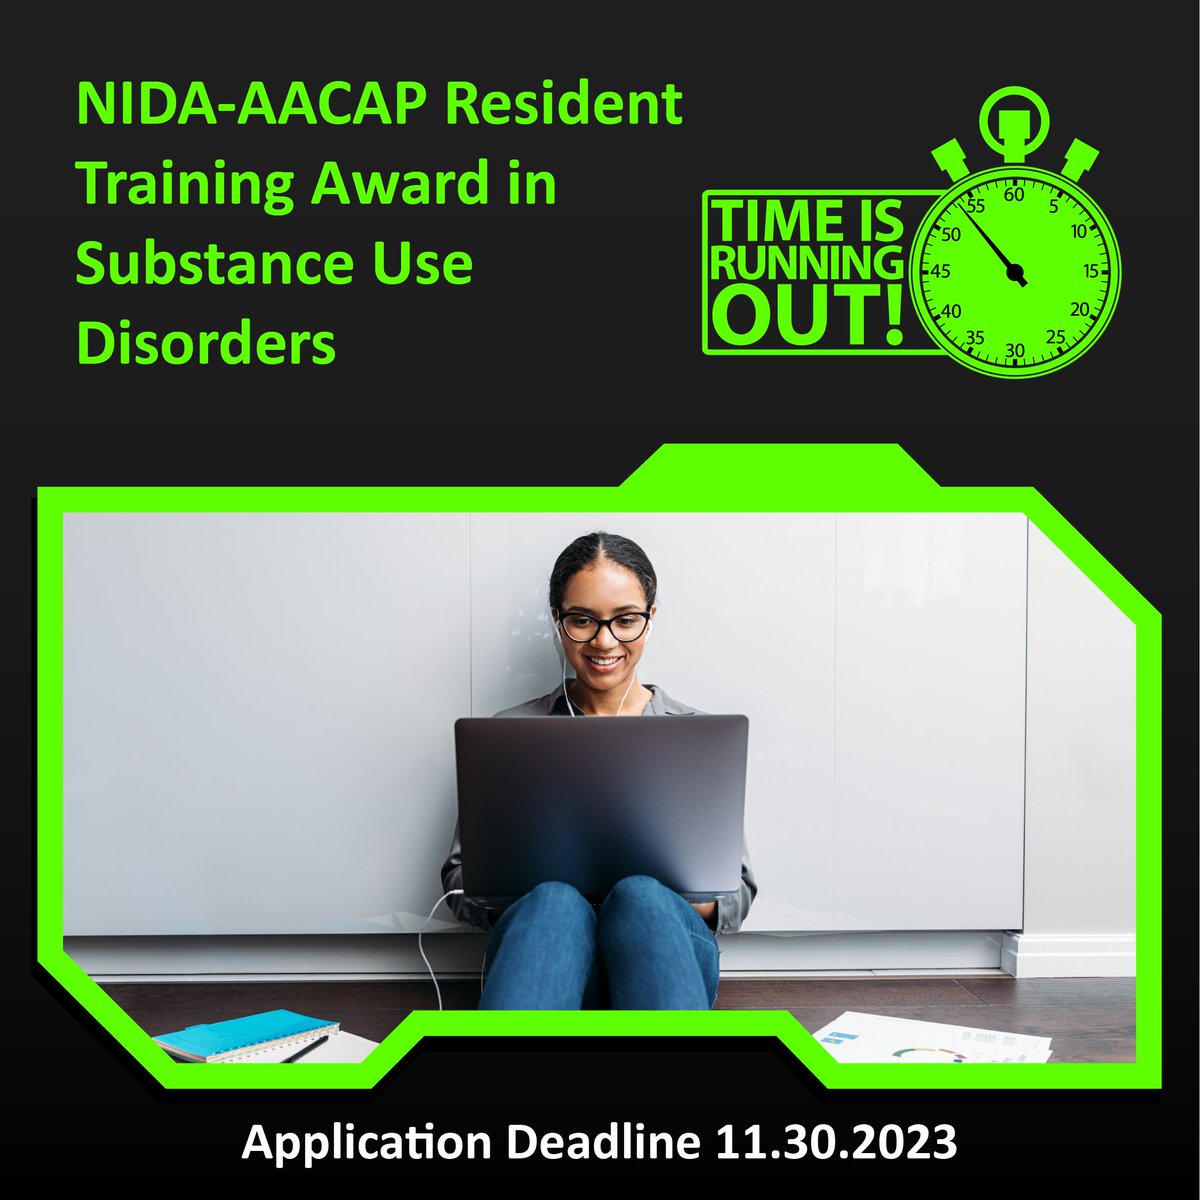 Last chance to submit your applications for the NIDA-AACAP Resident Training Award in Substance Use Disorders, supported by the National Institute on Drug Abuse (NIDA). Application Deadline 11.30.2023. Explore all the details here: bit.ly/3ZUAT5i #TrainingOpportunity